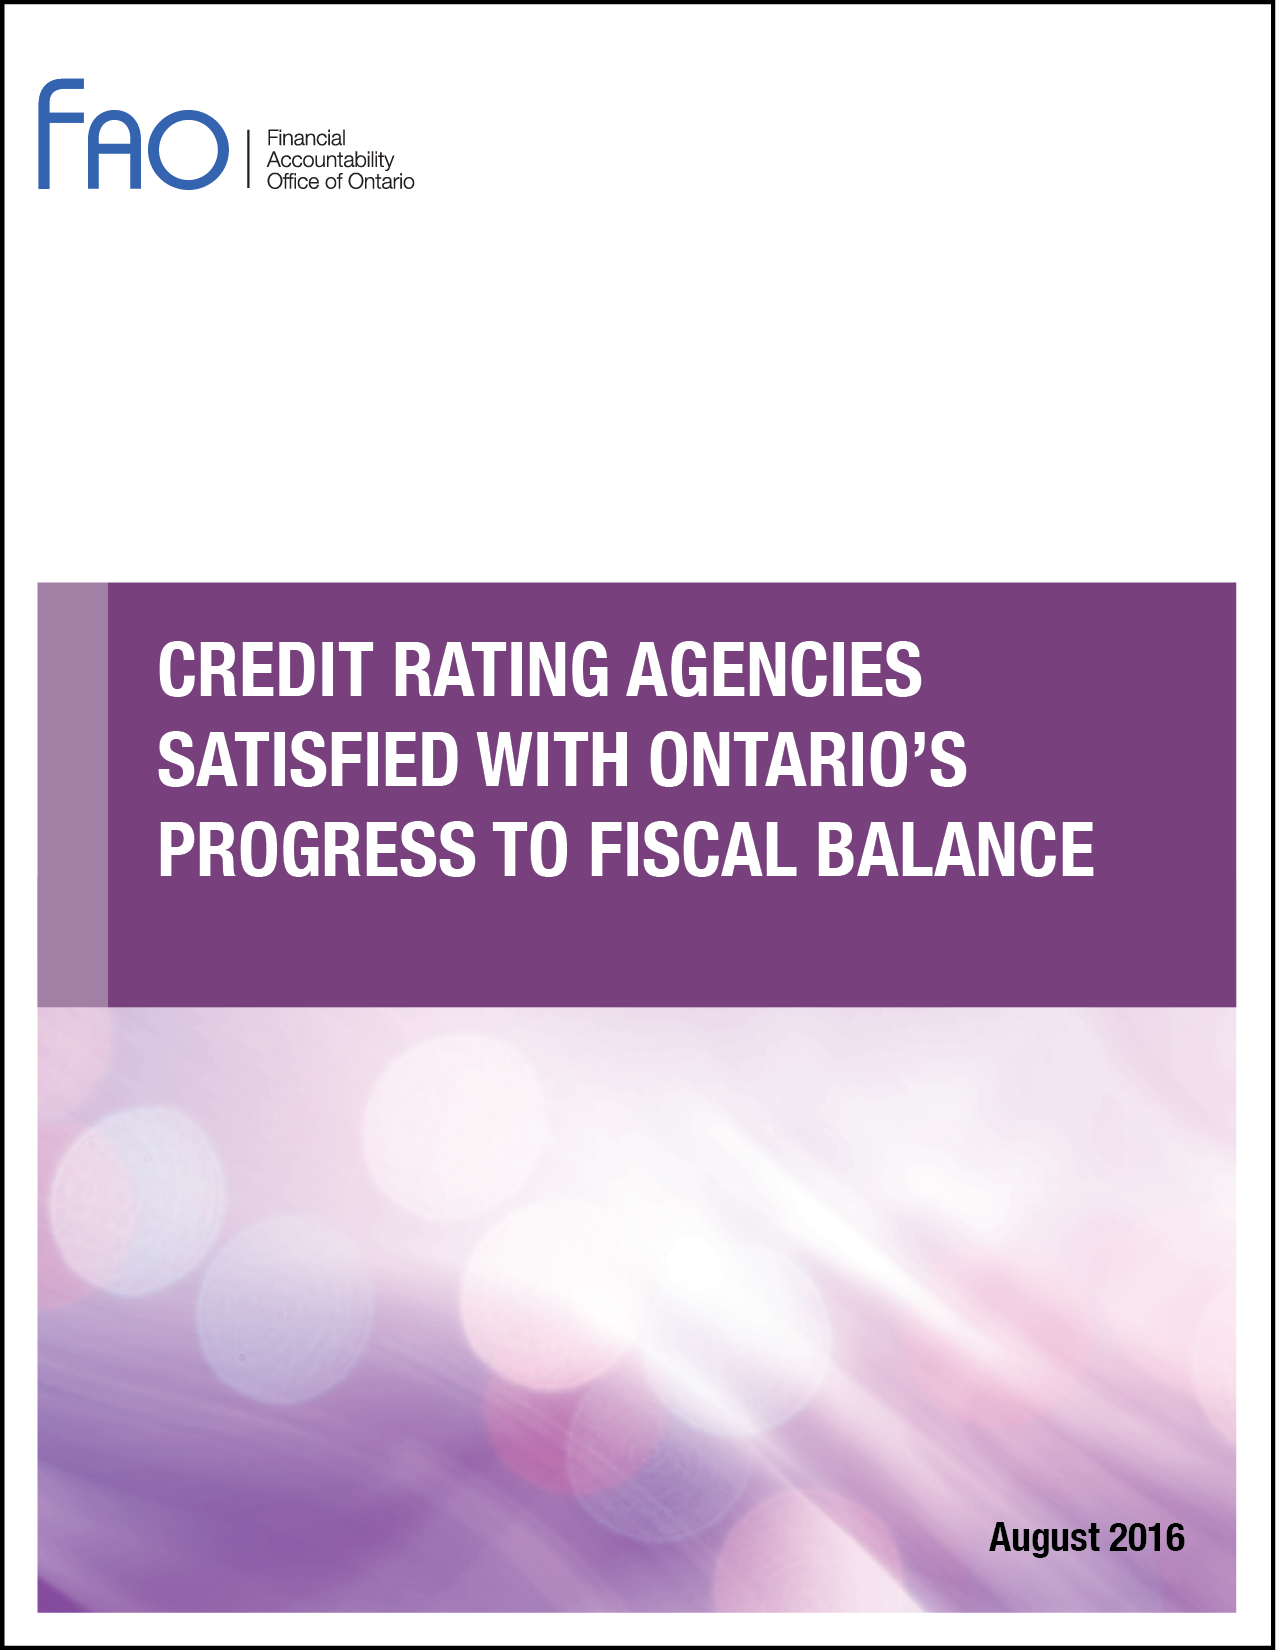 Credit Rating Agencies Satisfied with Ontario’s Progress to Fiscal Balance